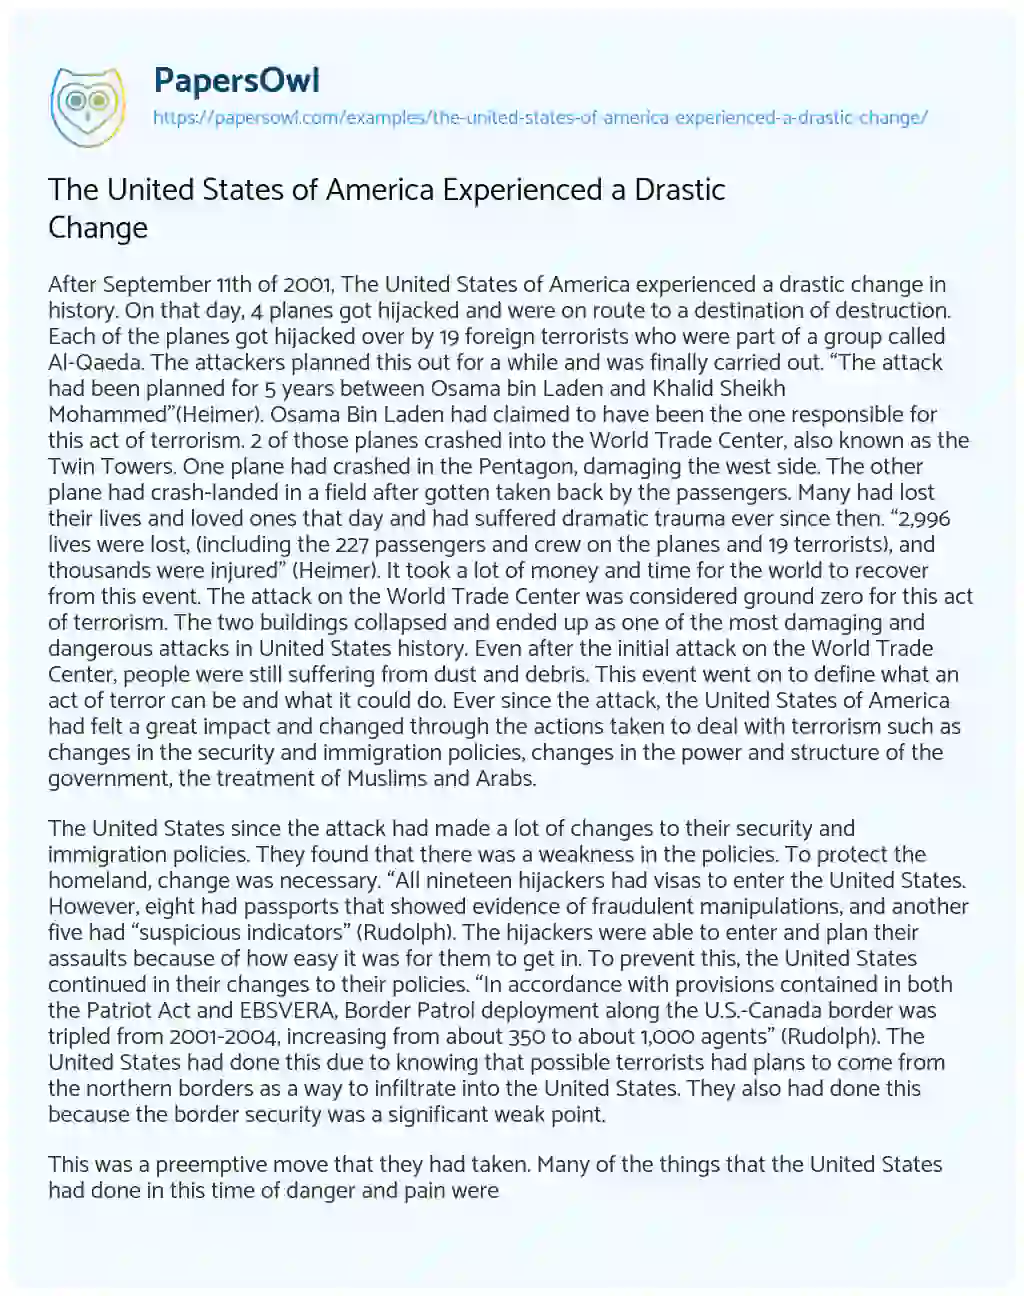 Essay on The United States of America Experienced a Drastic Change